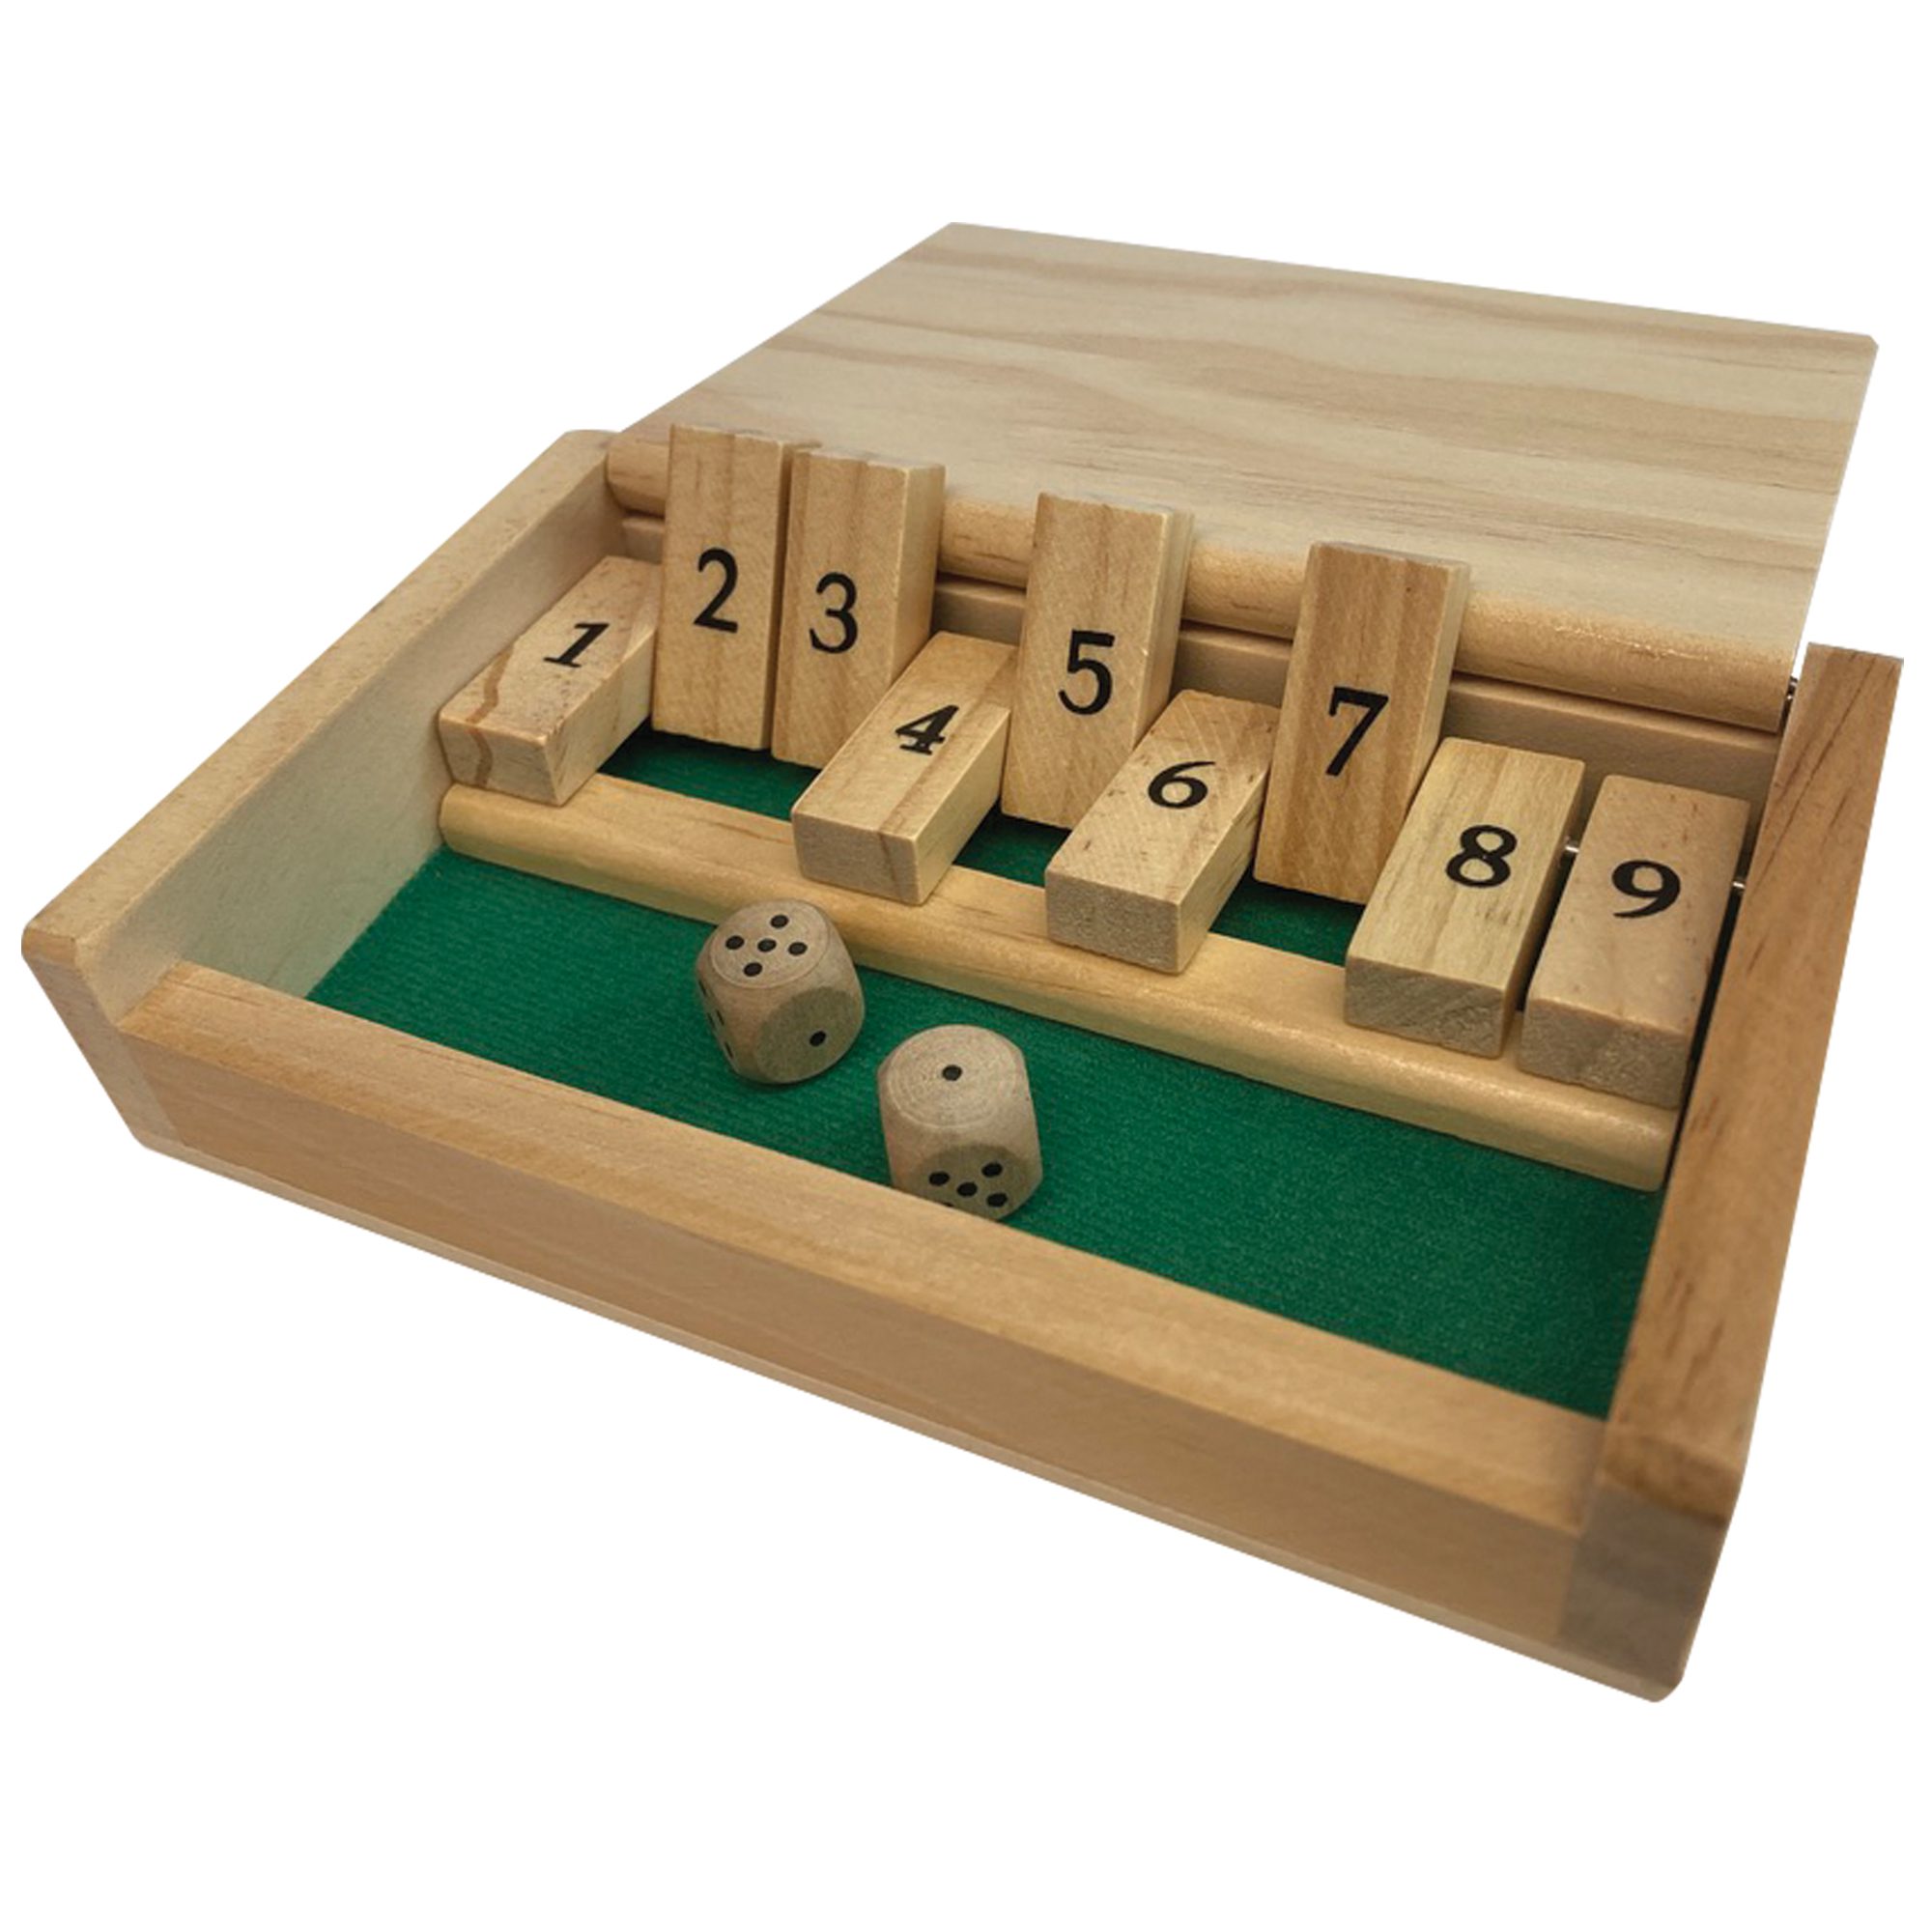 Wooden Shut The Box Game - House of Marbles